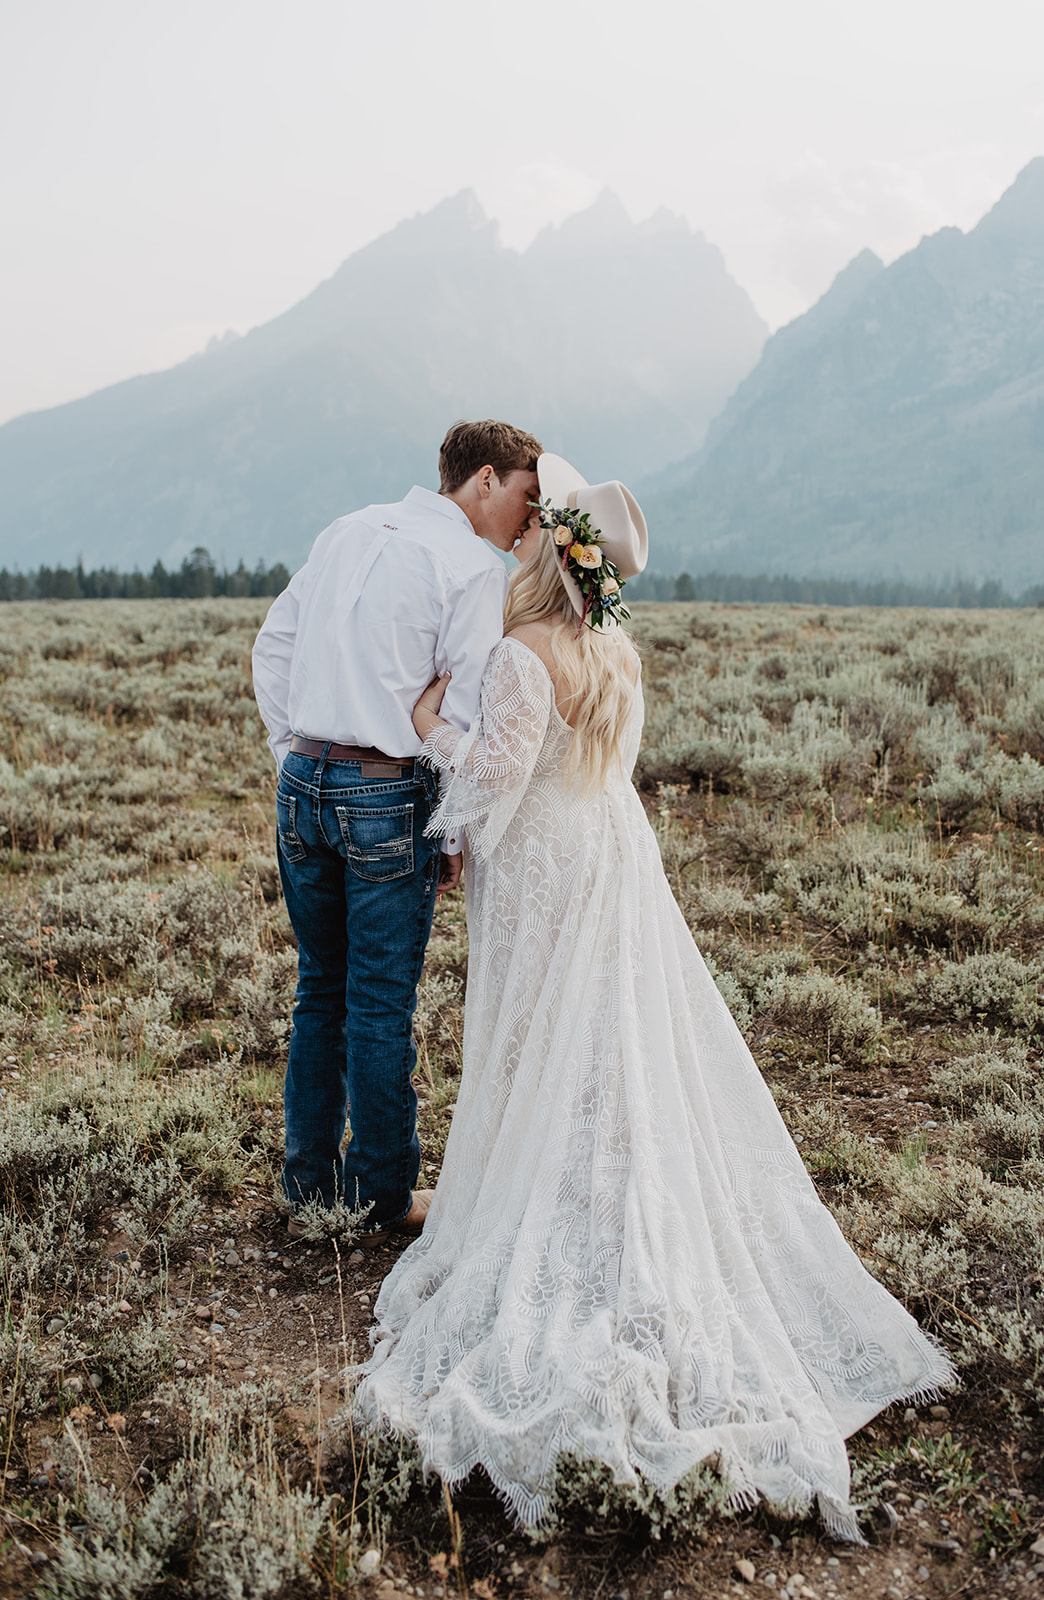 bride and groom kissing in a field in the Tetons for their bridal photos in the fall. bride wearing a bohemian lace dress with a tan hat and flowers, groom wearing jeans and a white shirt